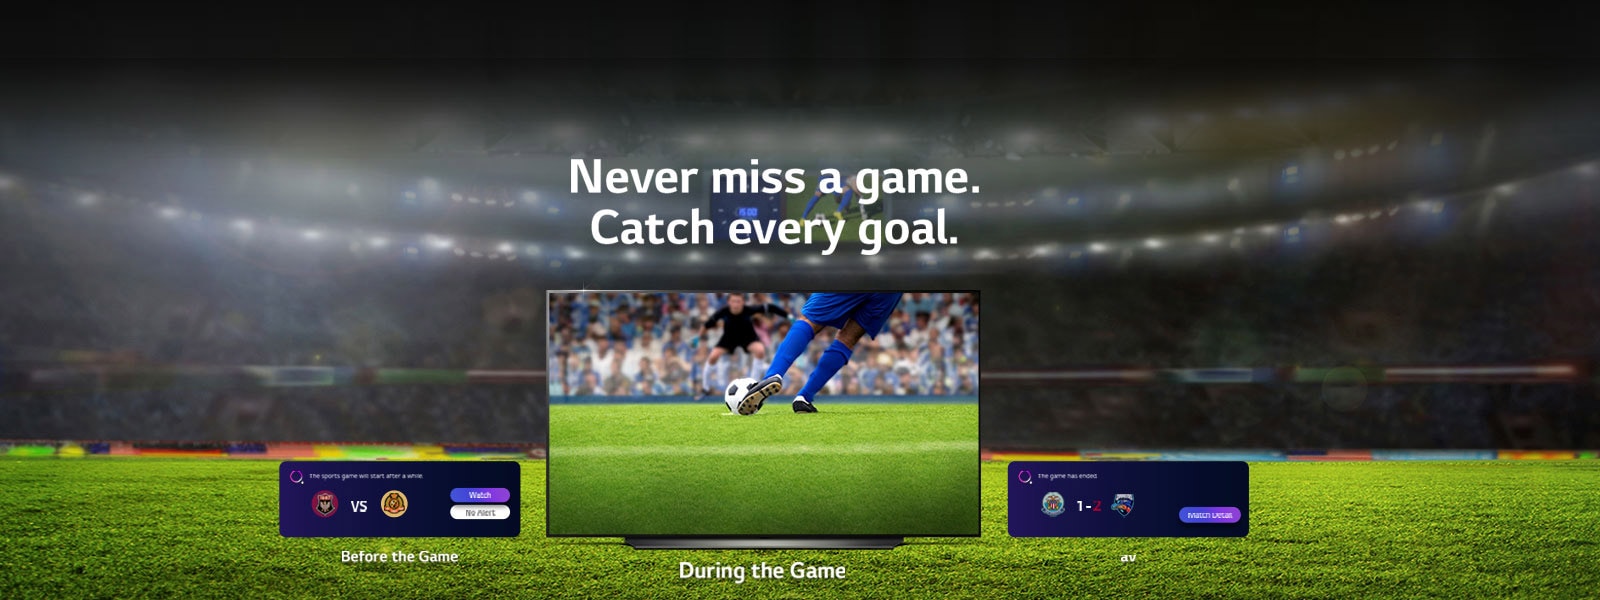 Never miss a game.Catch every goal.